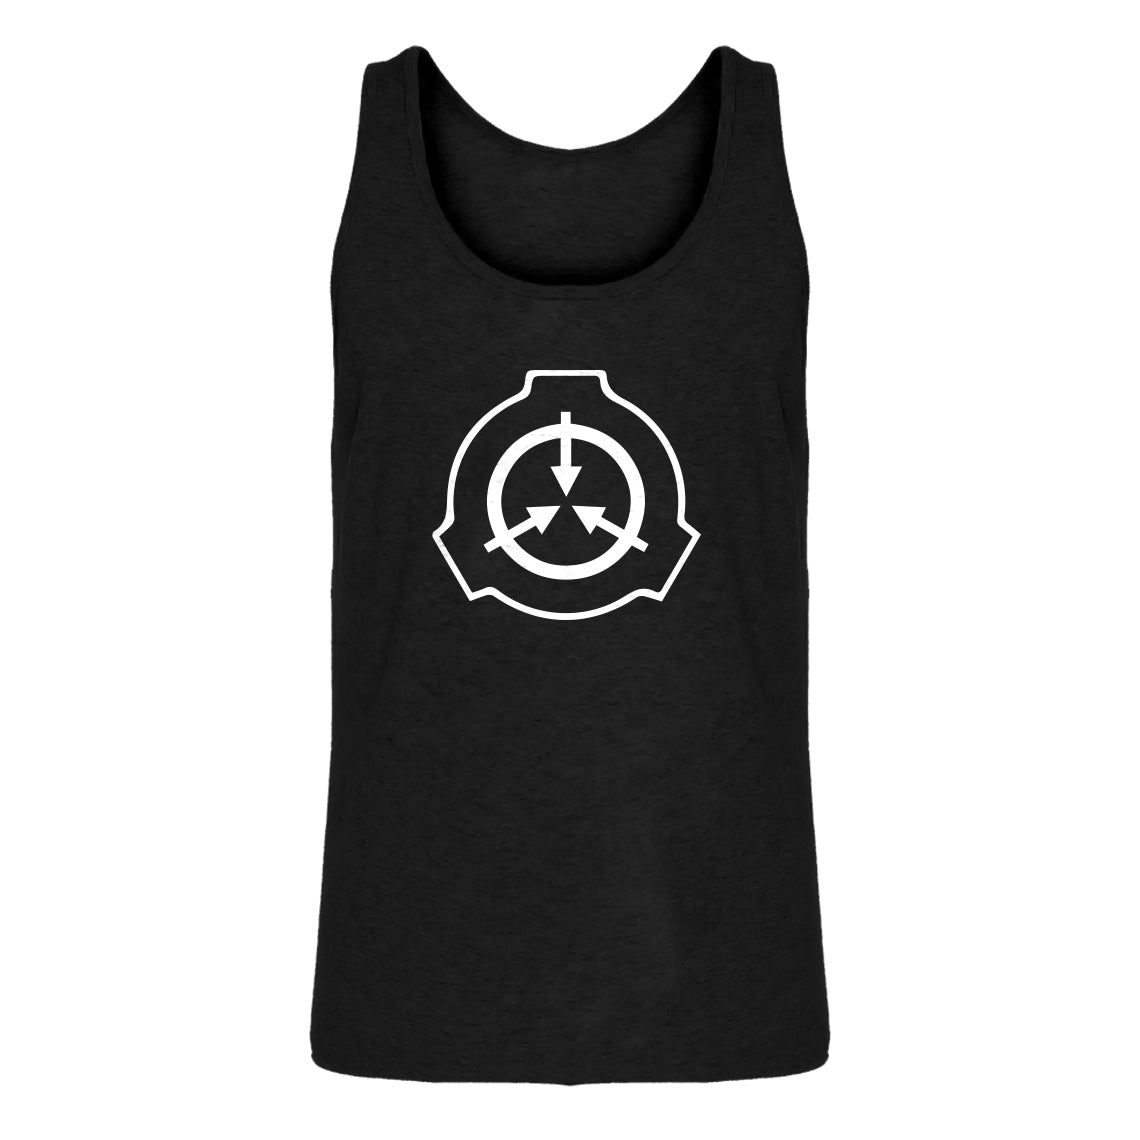 Mens SCP Secure Contain Protect Jersey Tank Top – Indica Plateau